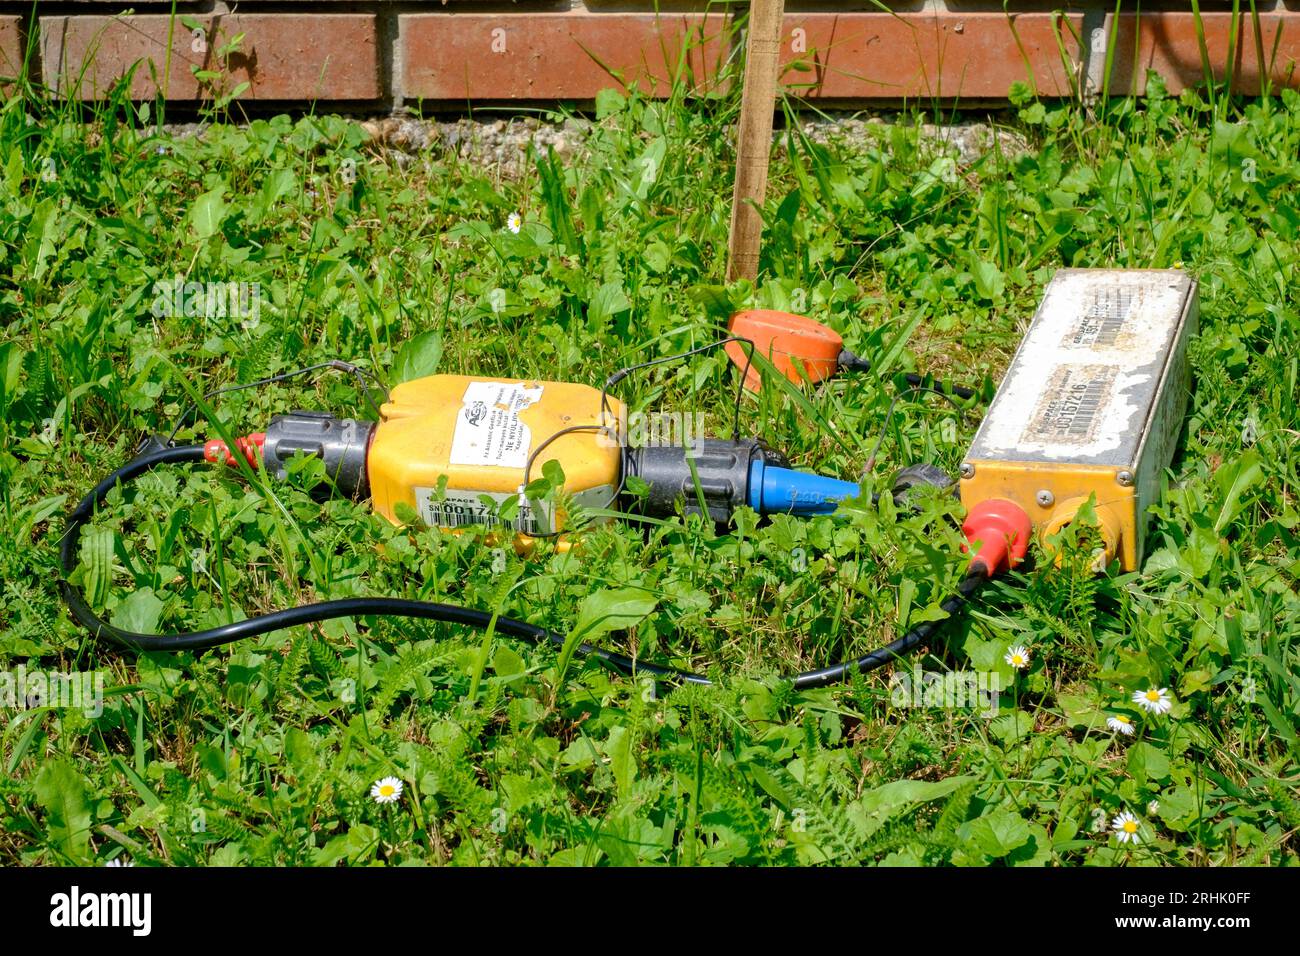 meter with ancillary metering equipment for detecting underground oil reserves laying on ground of rural country lane zala county hungary Stock Photo